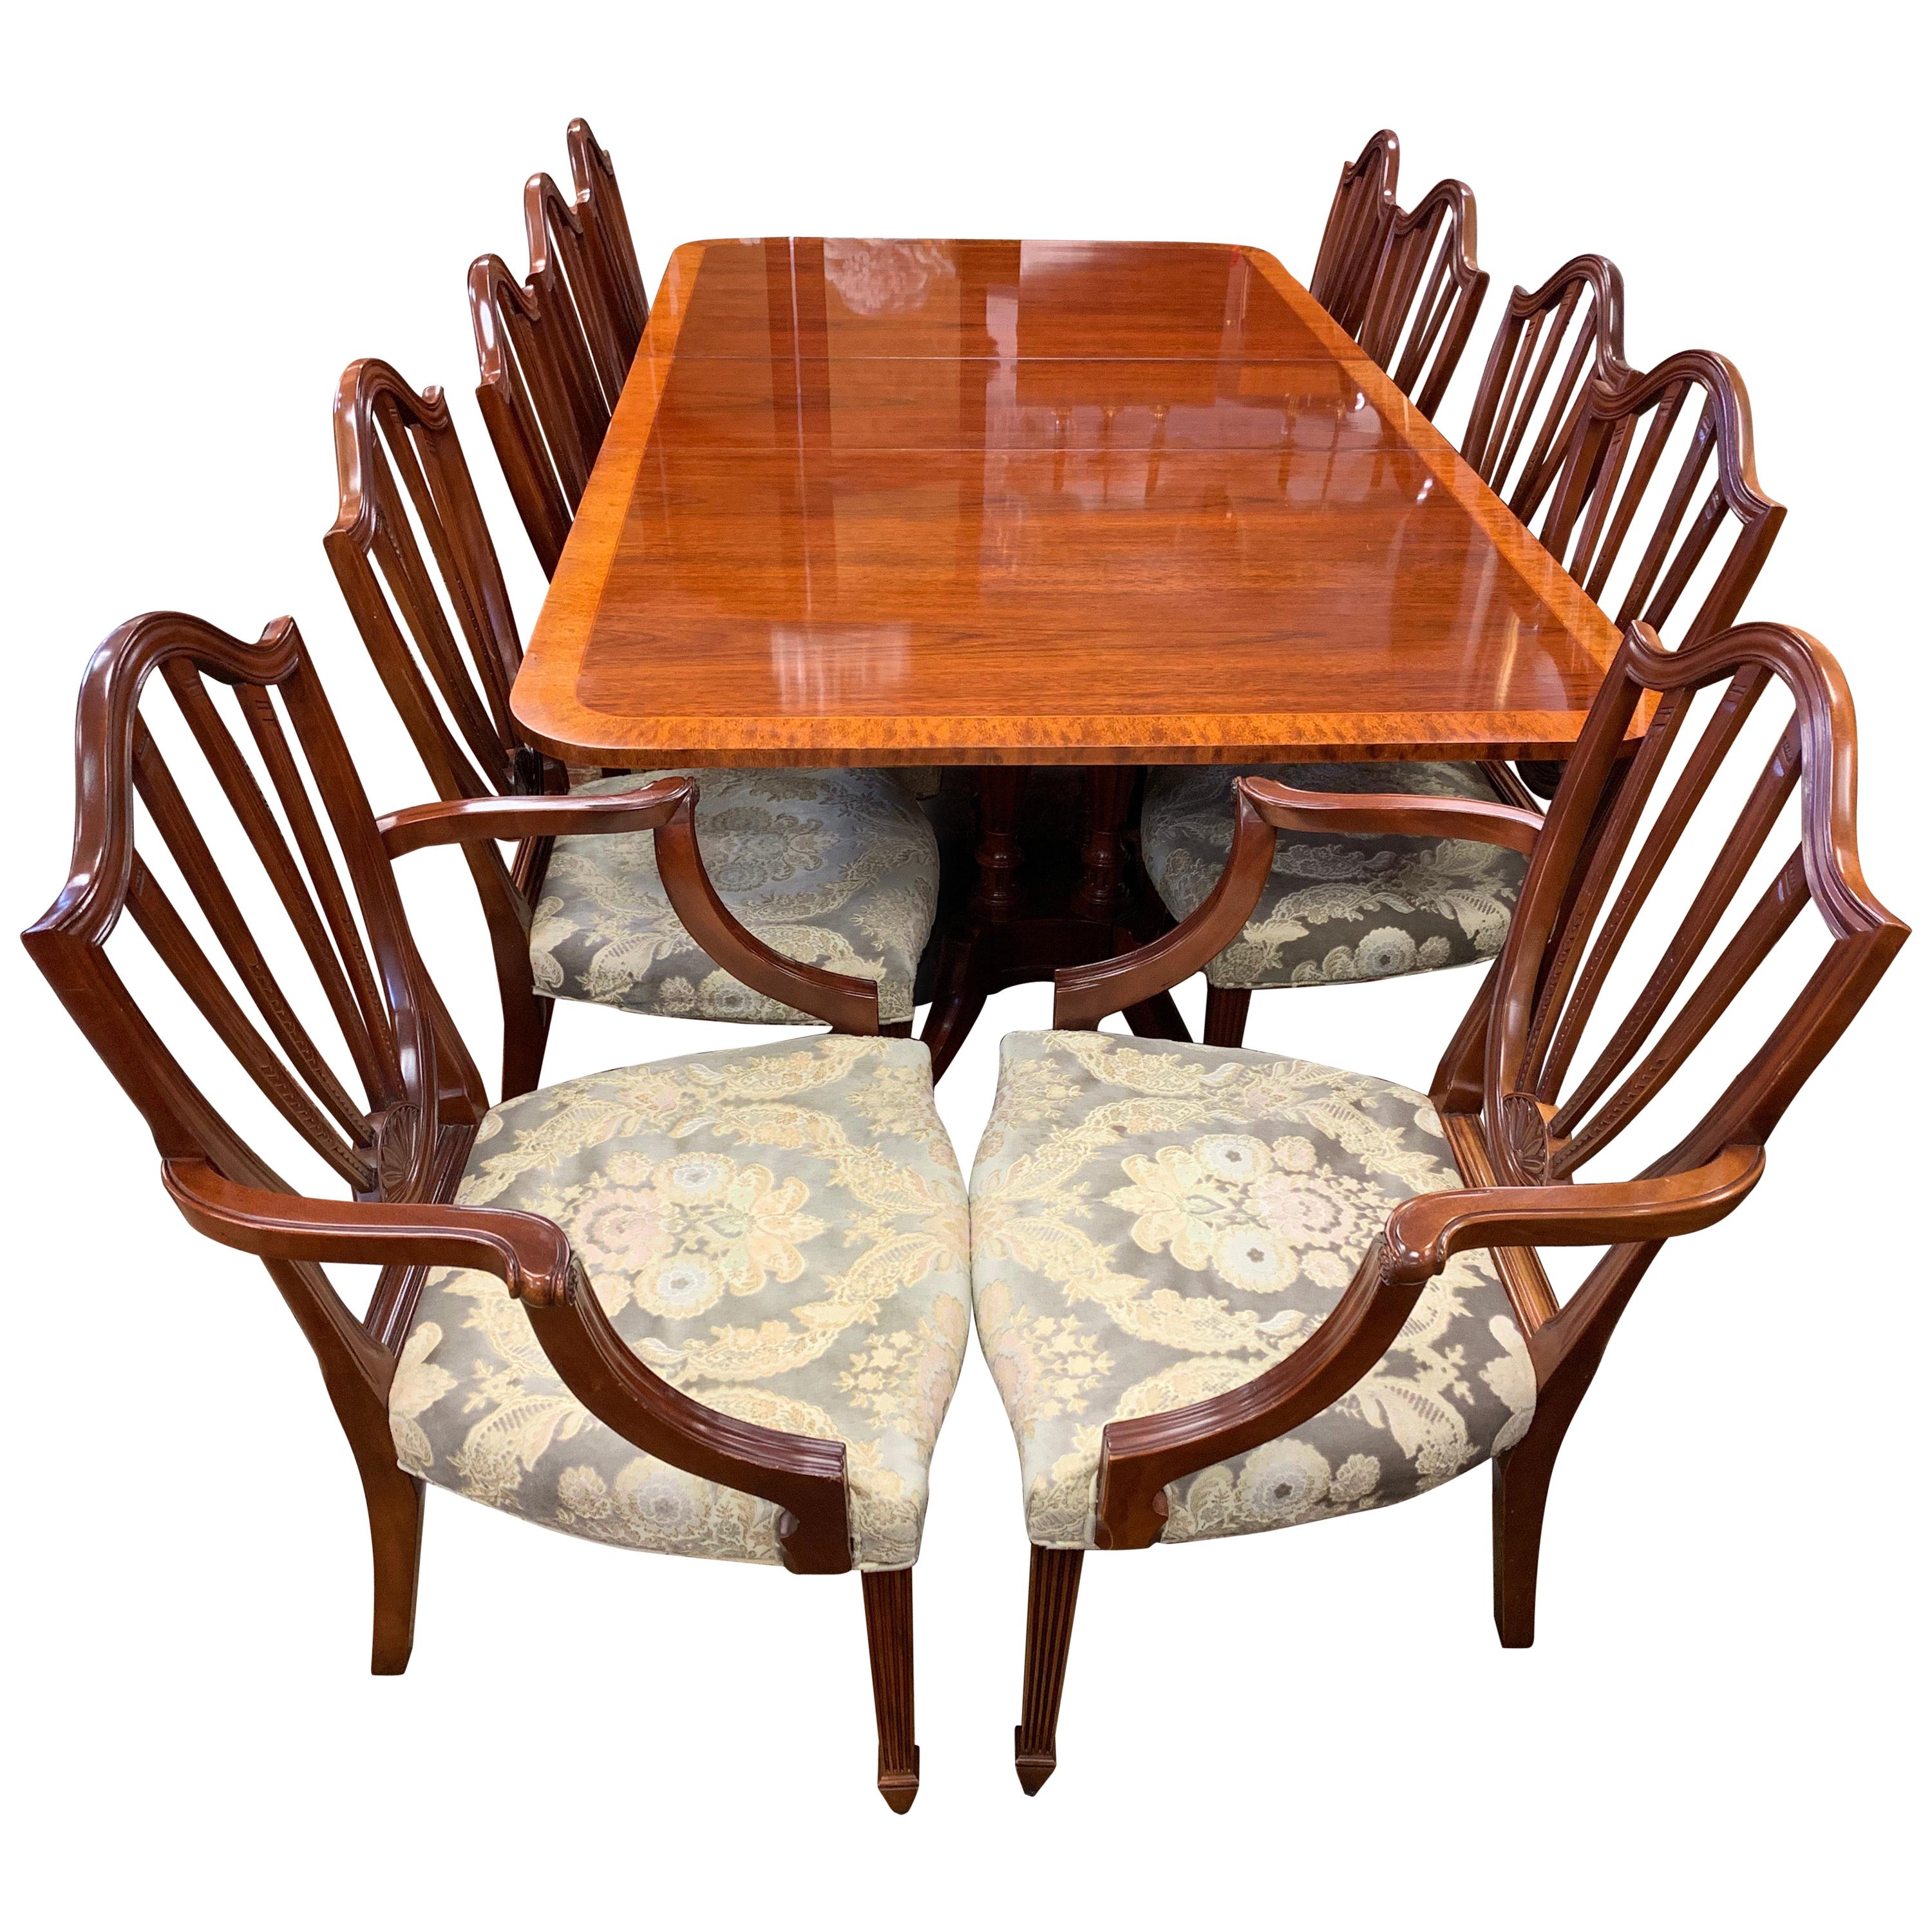 Baker Furniture Mahogany Dining Room Set, Table and Ten Chairs